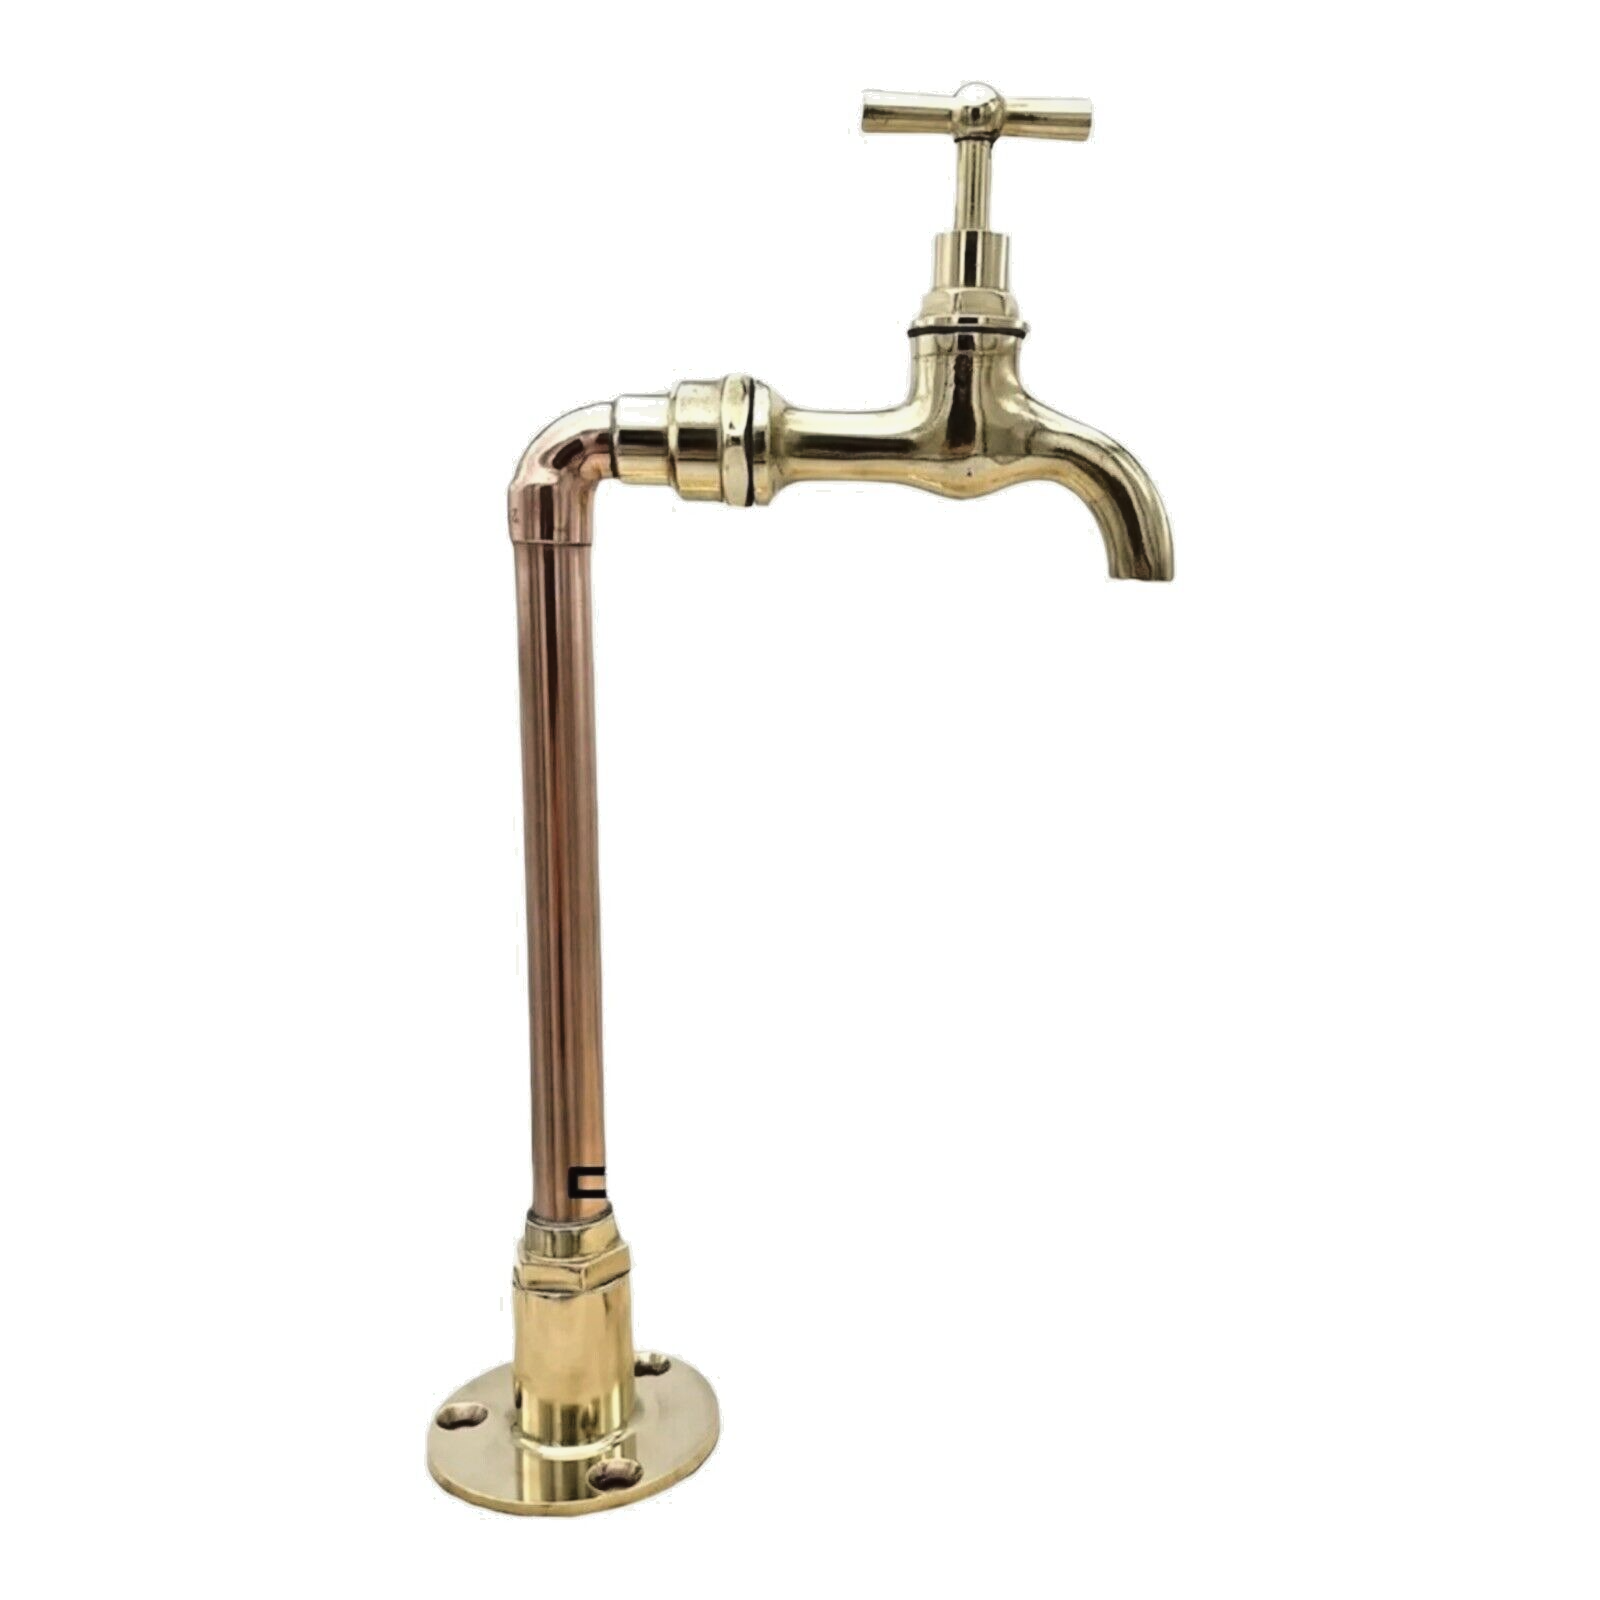 Vintage style copper and brass tap sold by All Things French Store